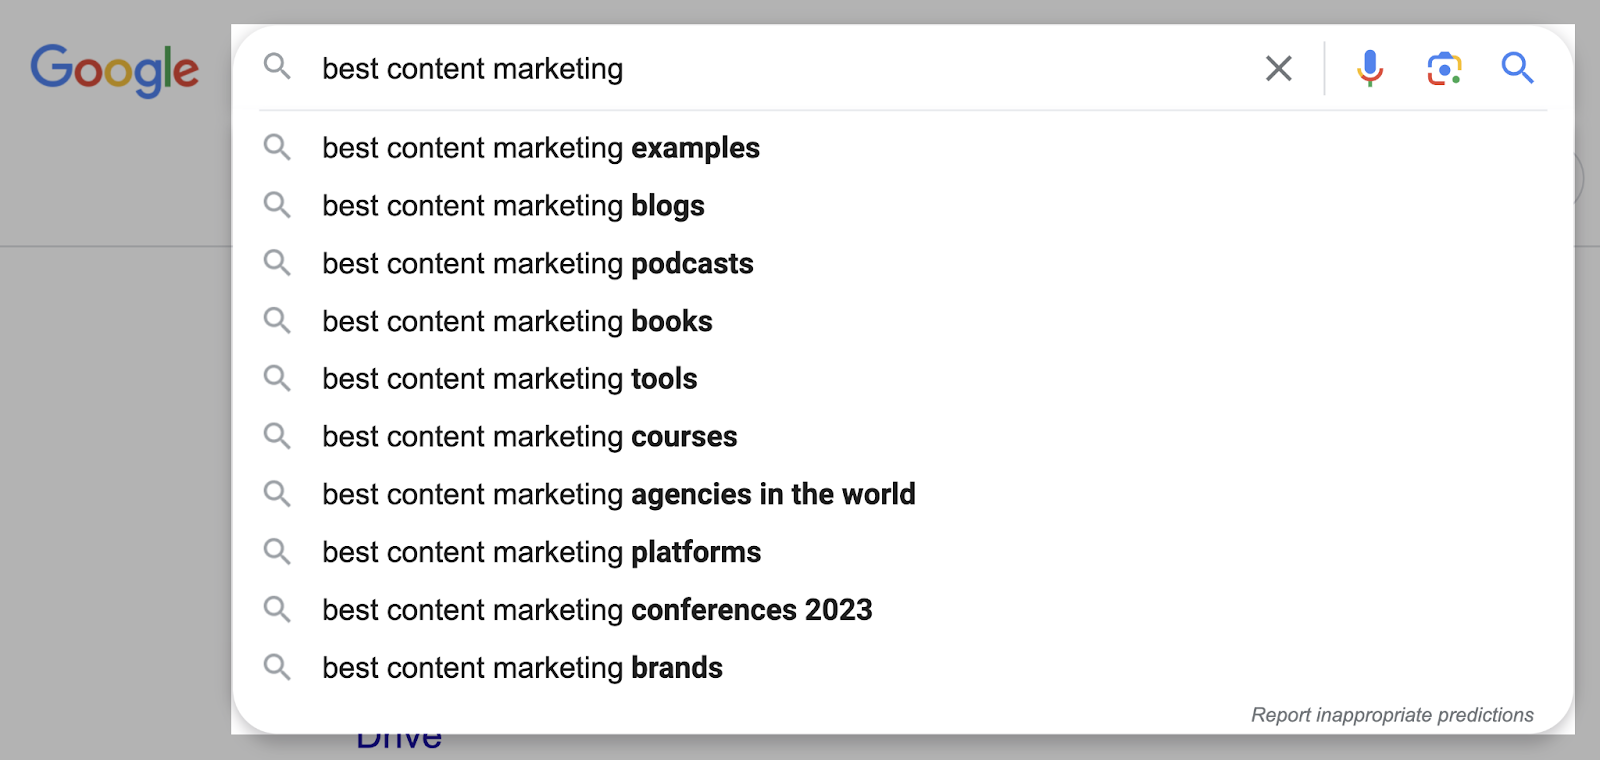 Google’s autocomplete suggestions for "best content marketing" search